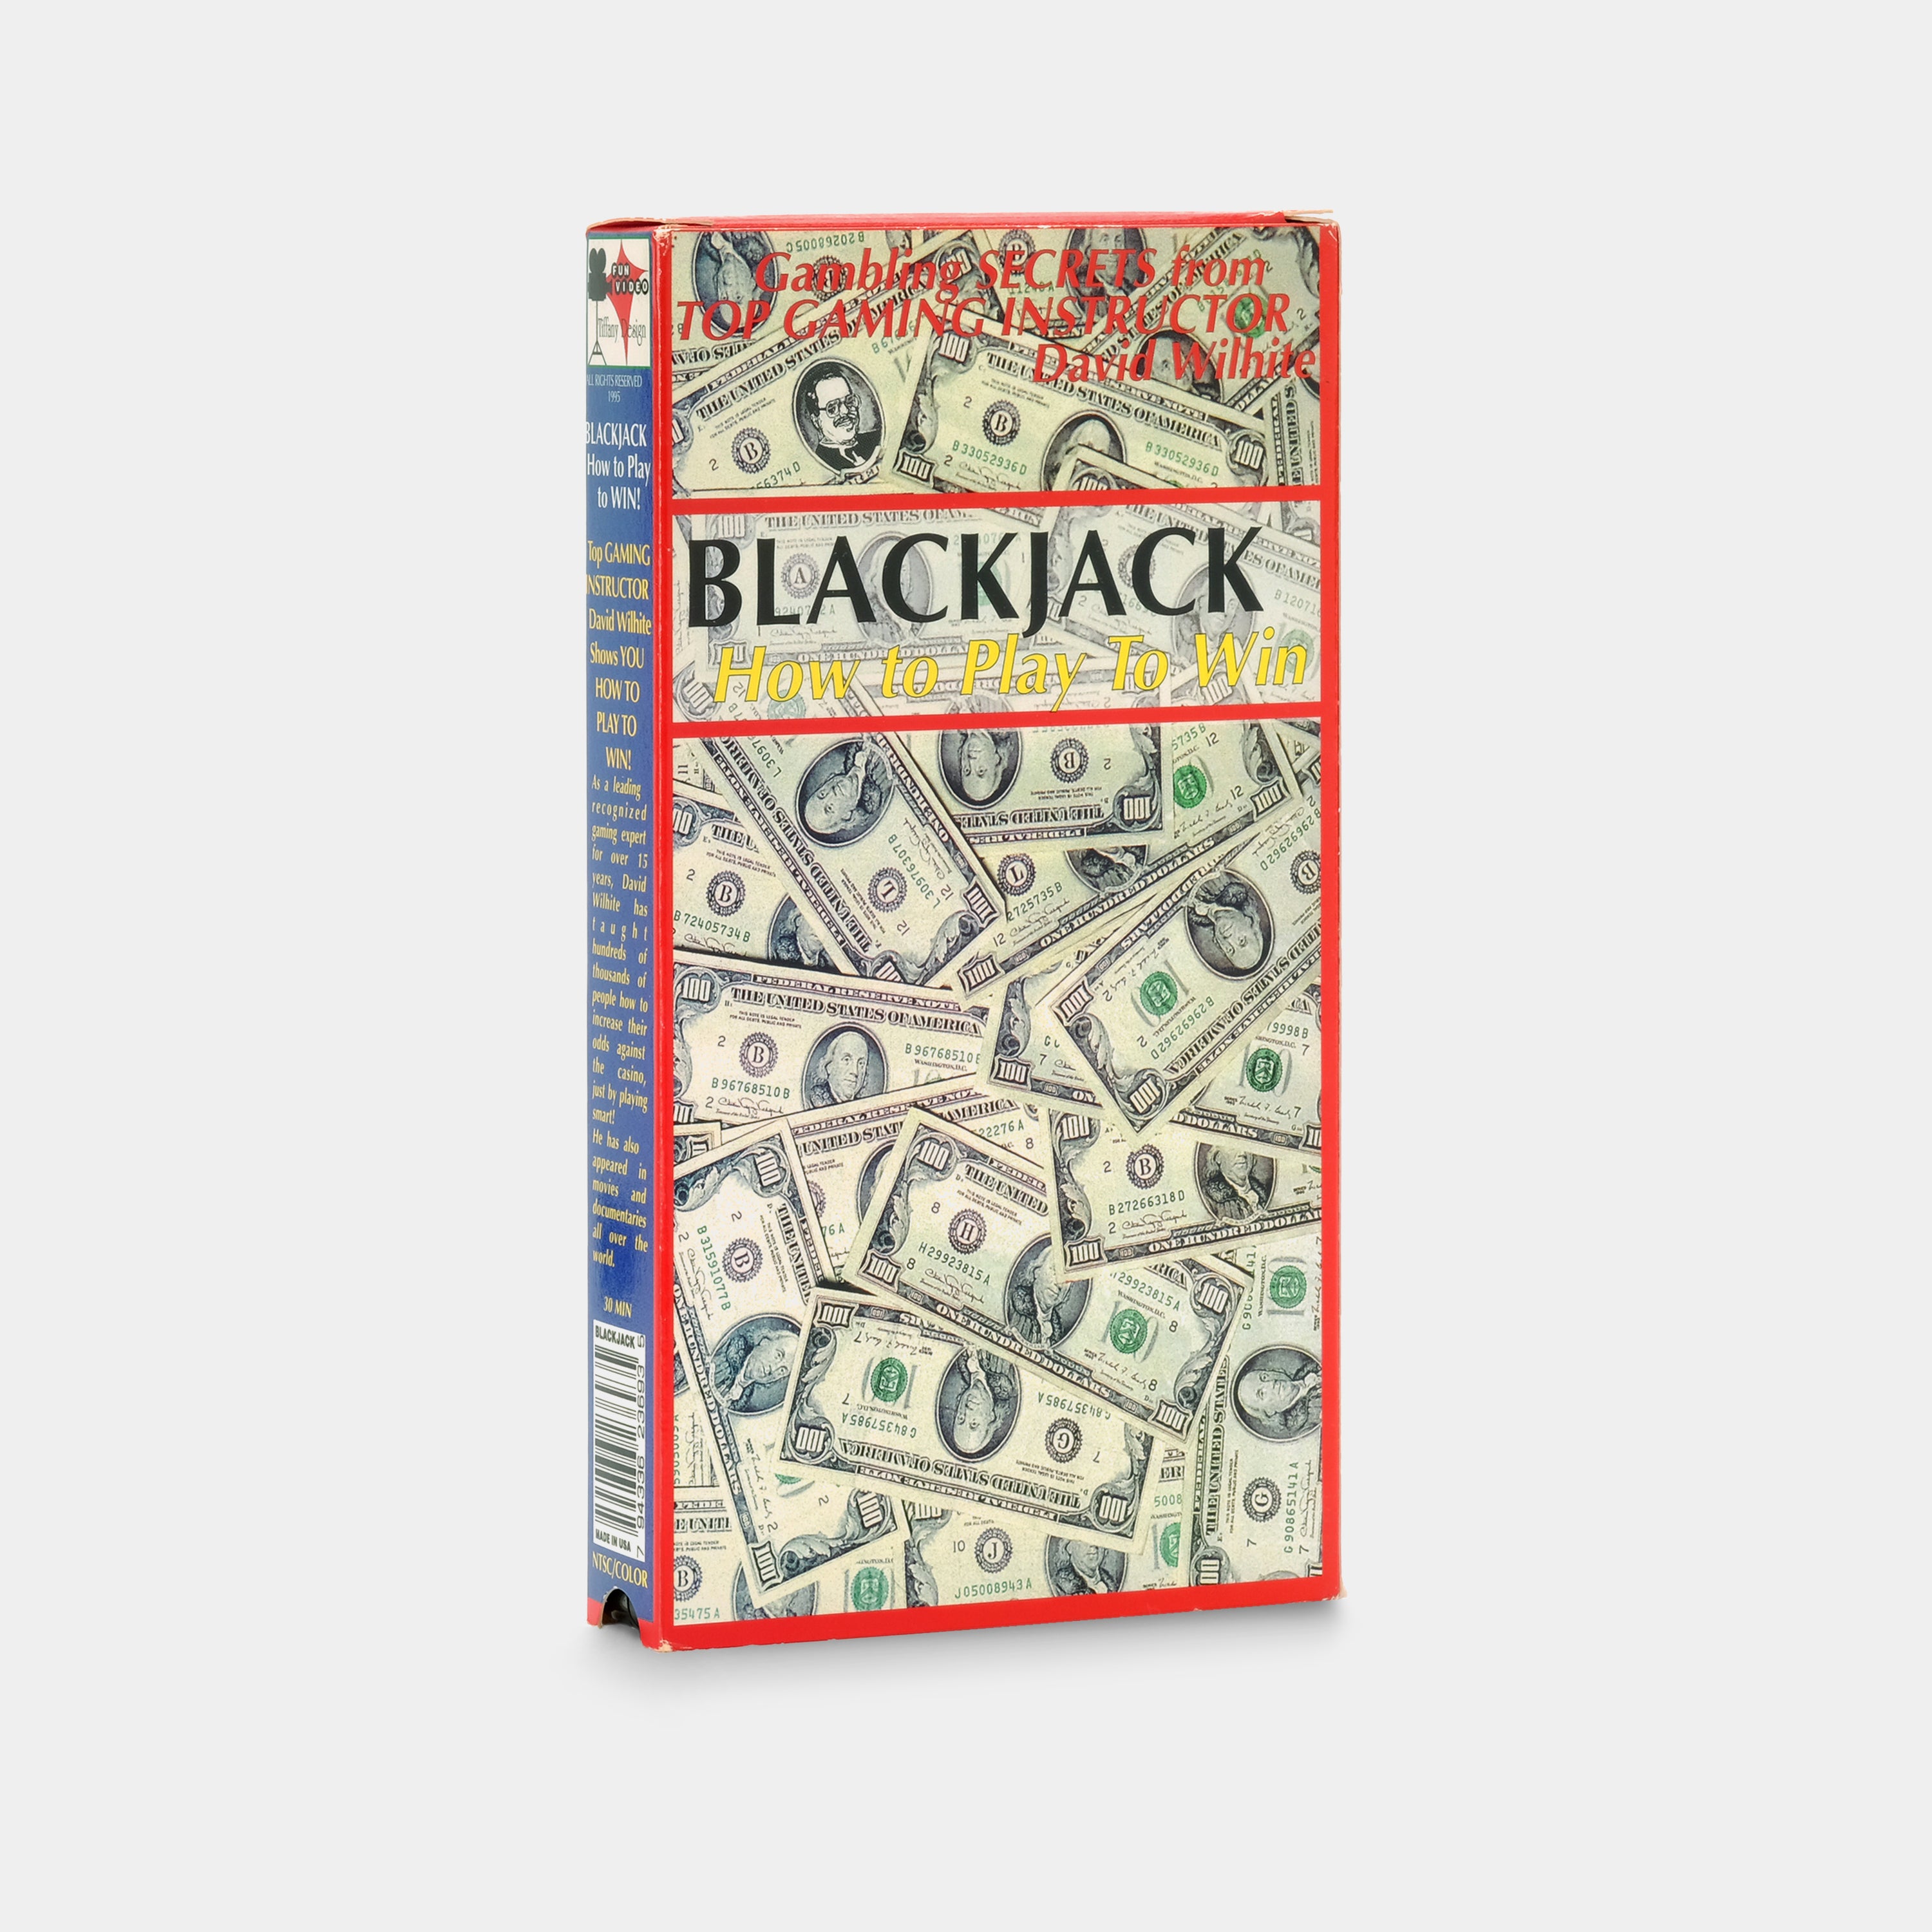 Blackjack: How To Play To Win VHS Tape